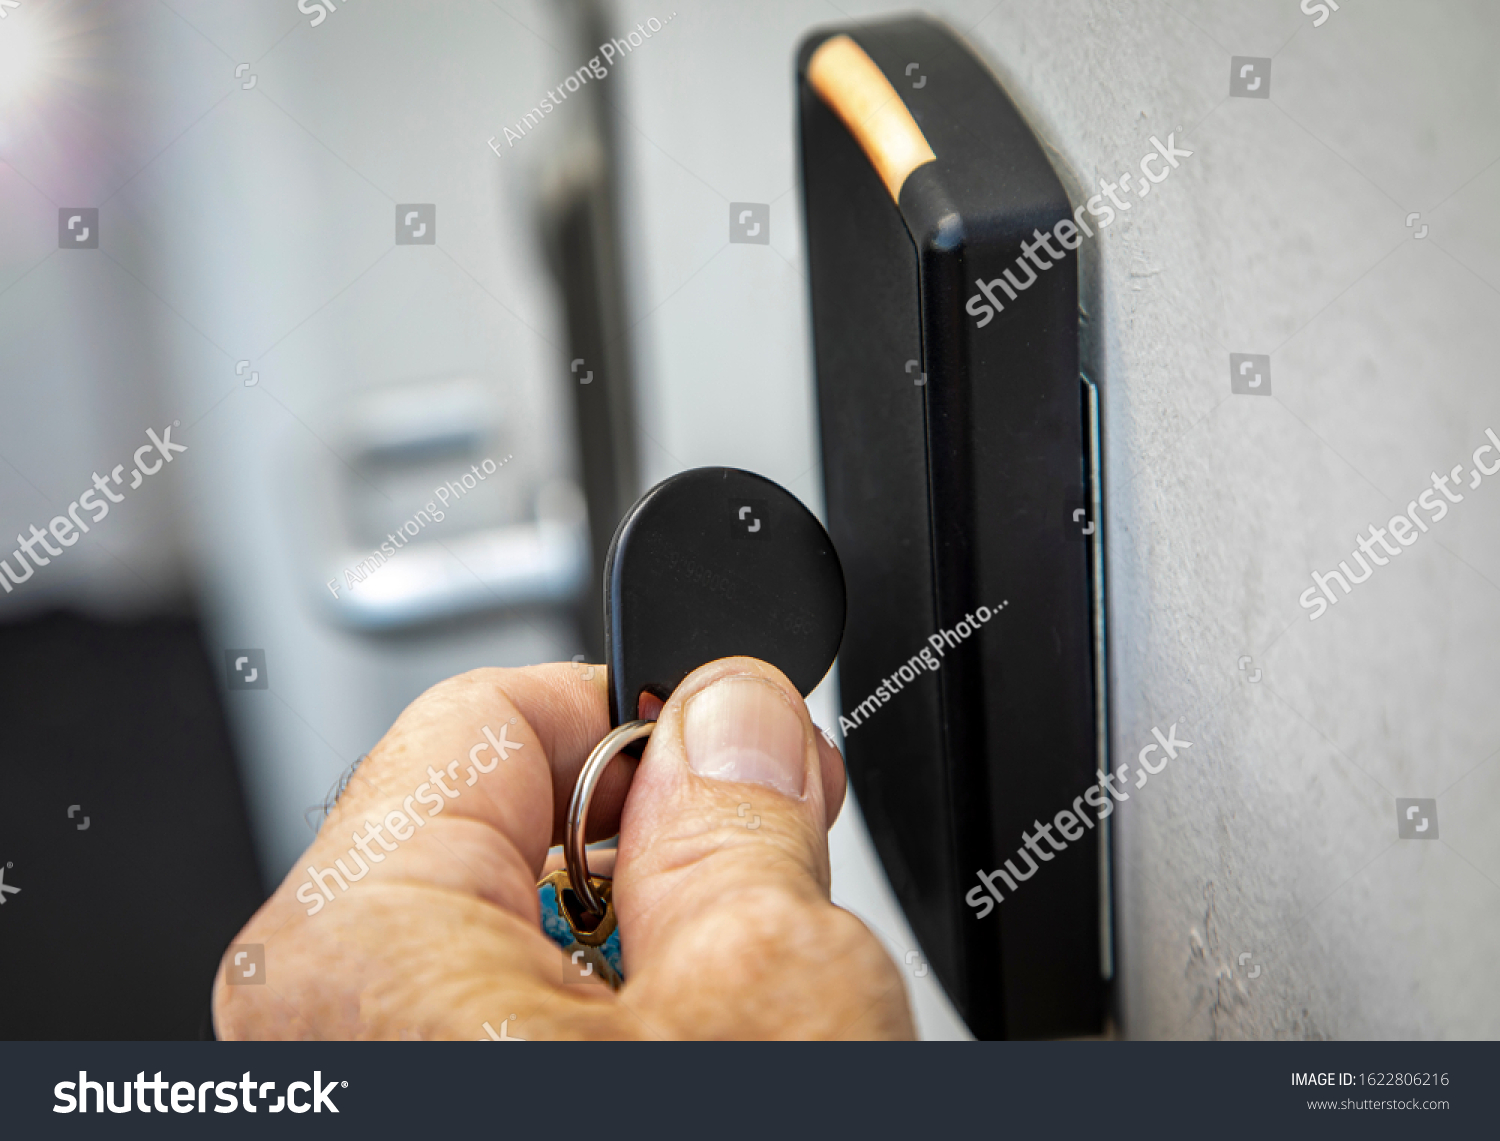 Fingers holding key fob on key fob sensor with door handle out of focus in the distance.  #1622806216